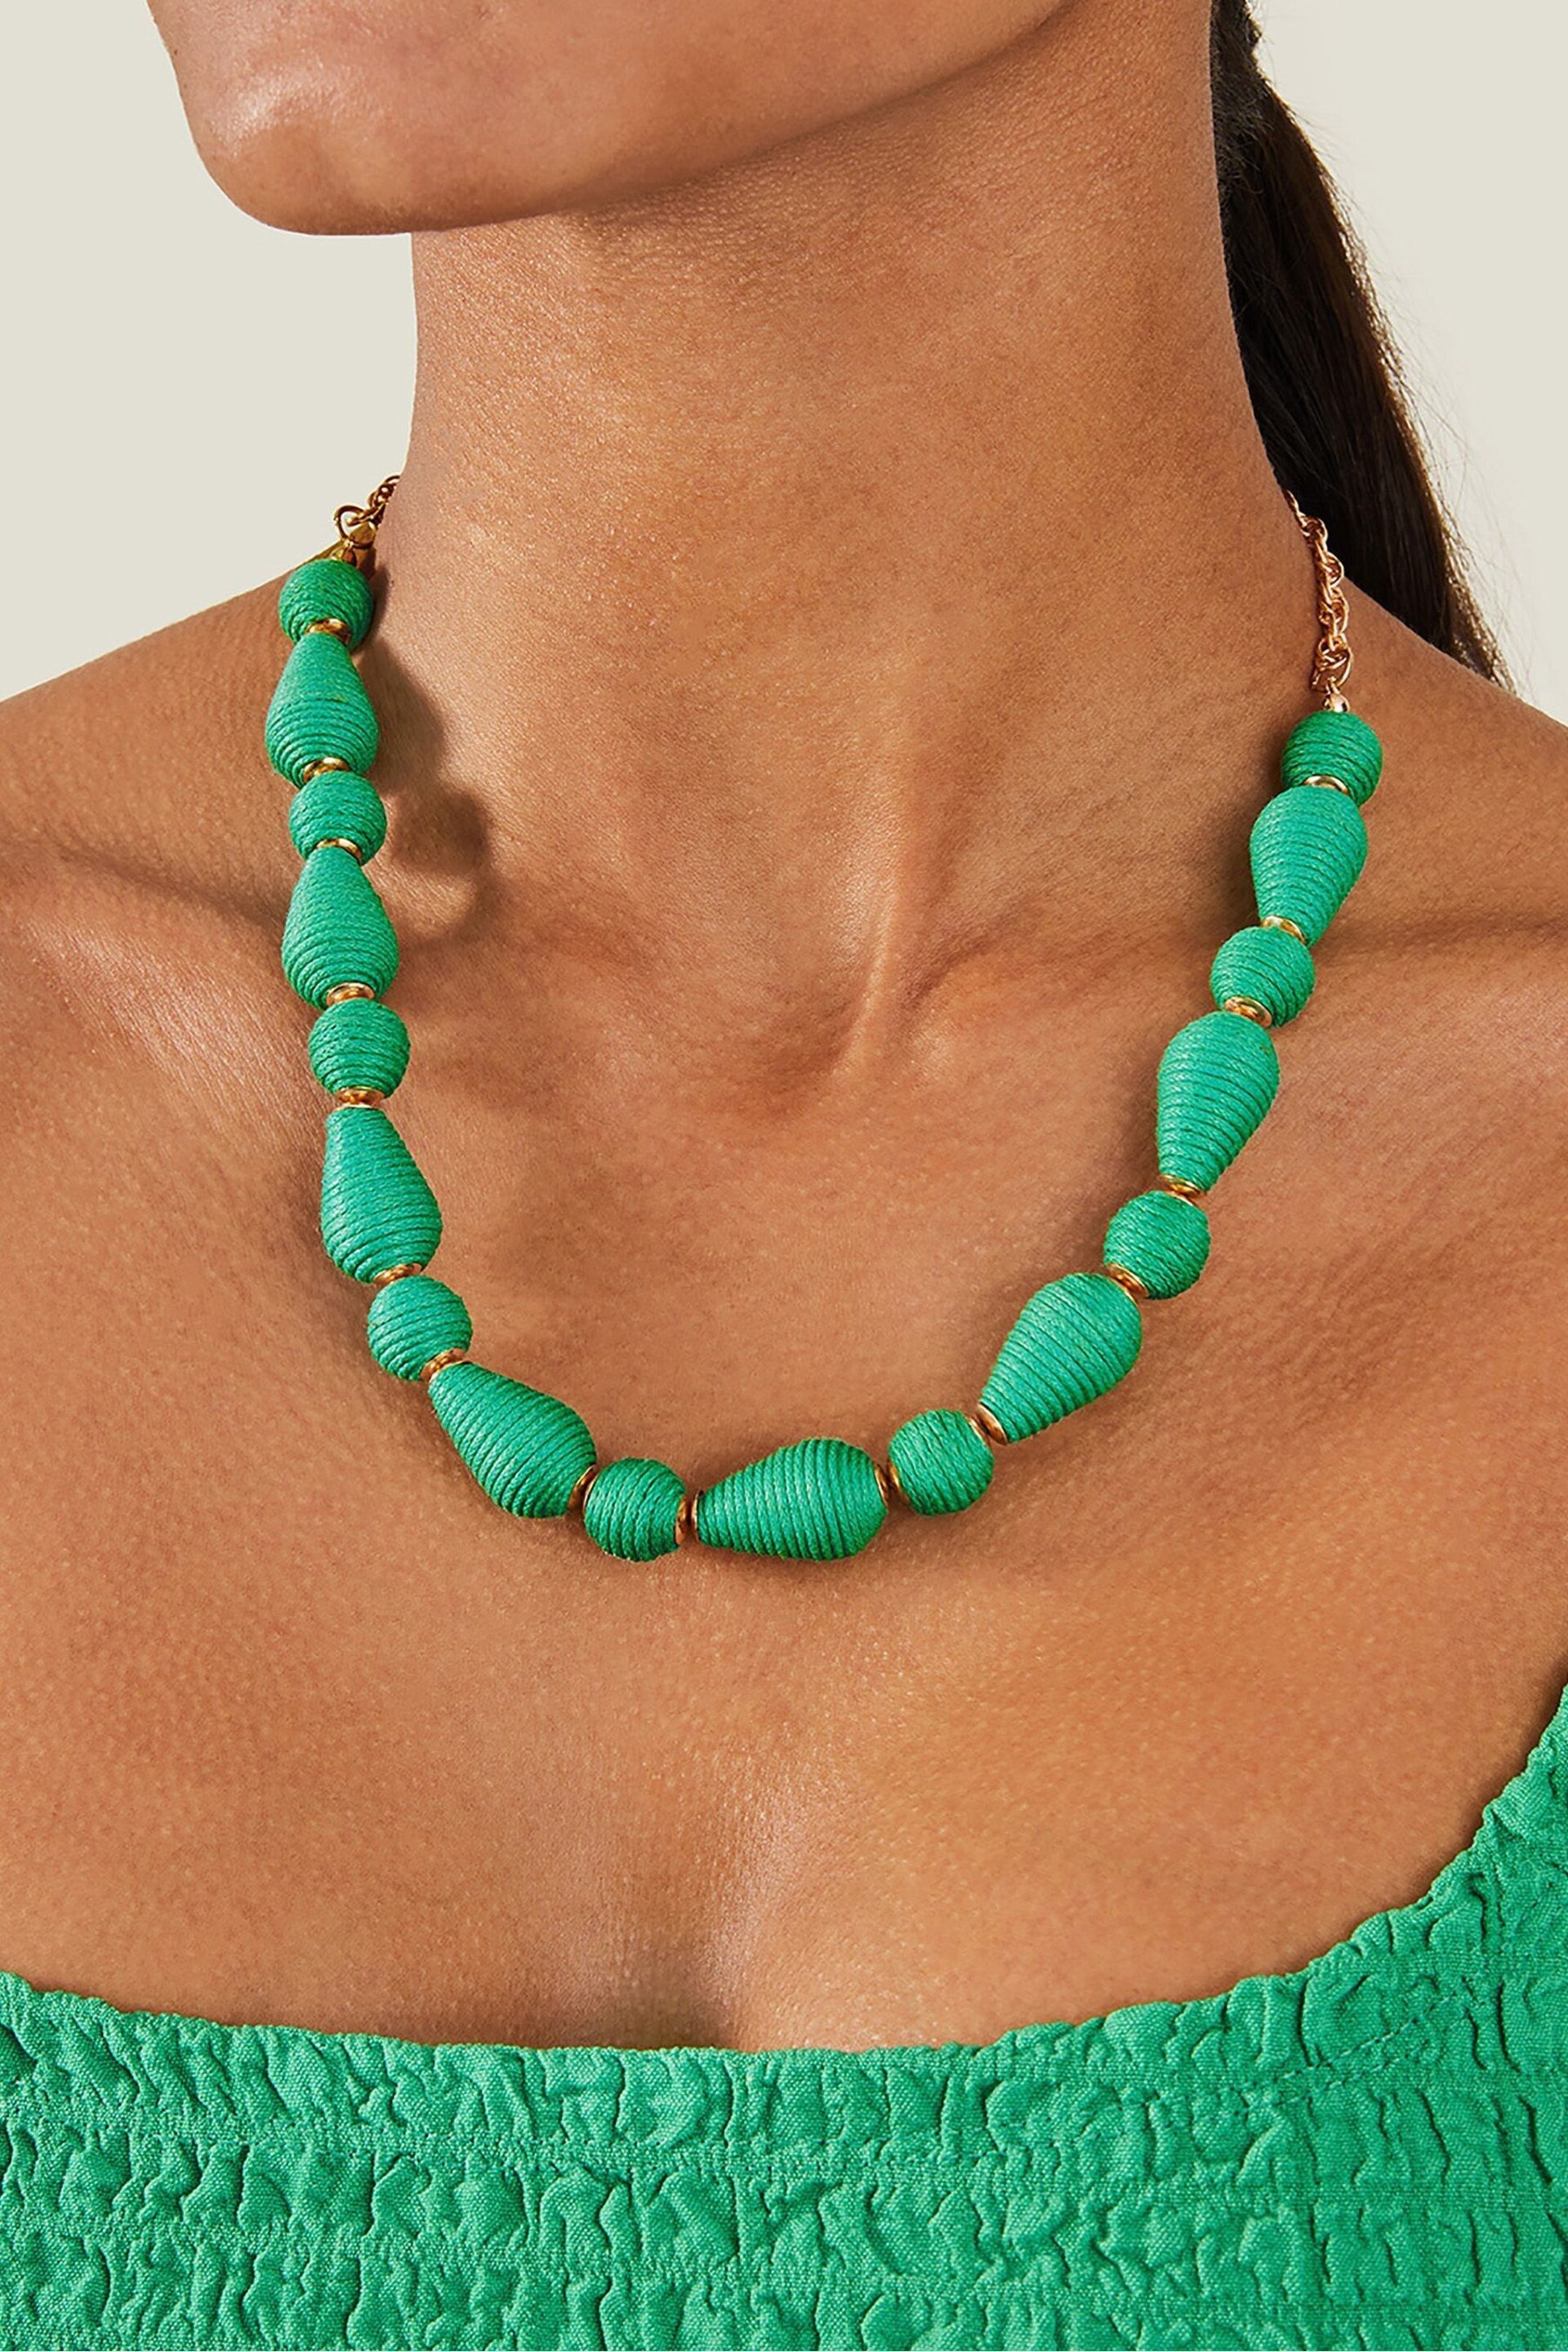 Accessorize Green Wrapped Collar Necklace - Image 3 of 3